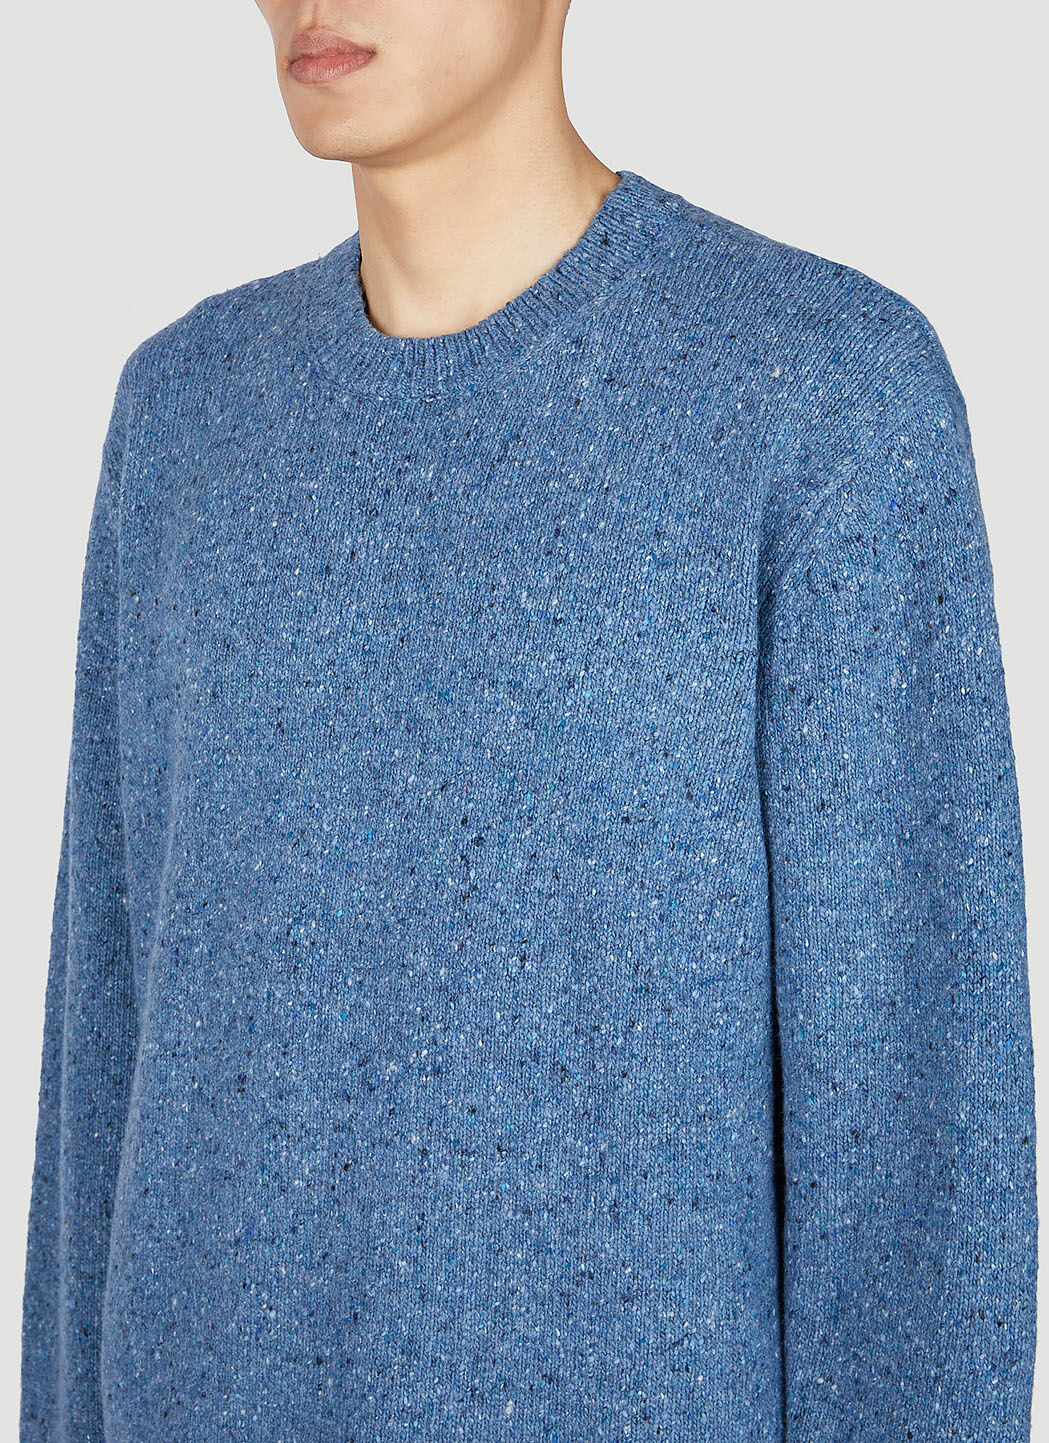 A.P.C. Chandler Sweater in Blue | LN-CC®